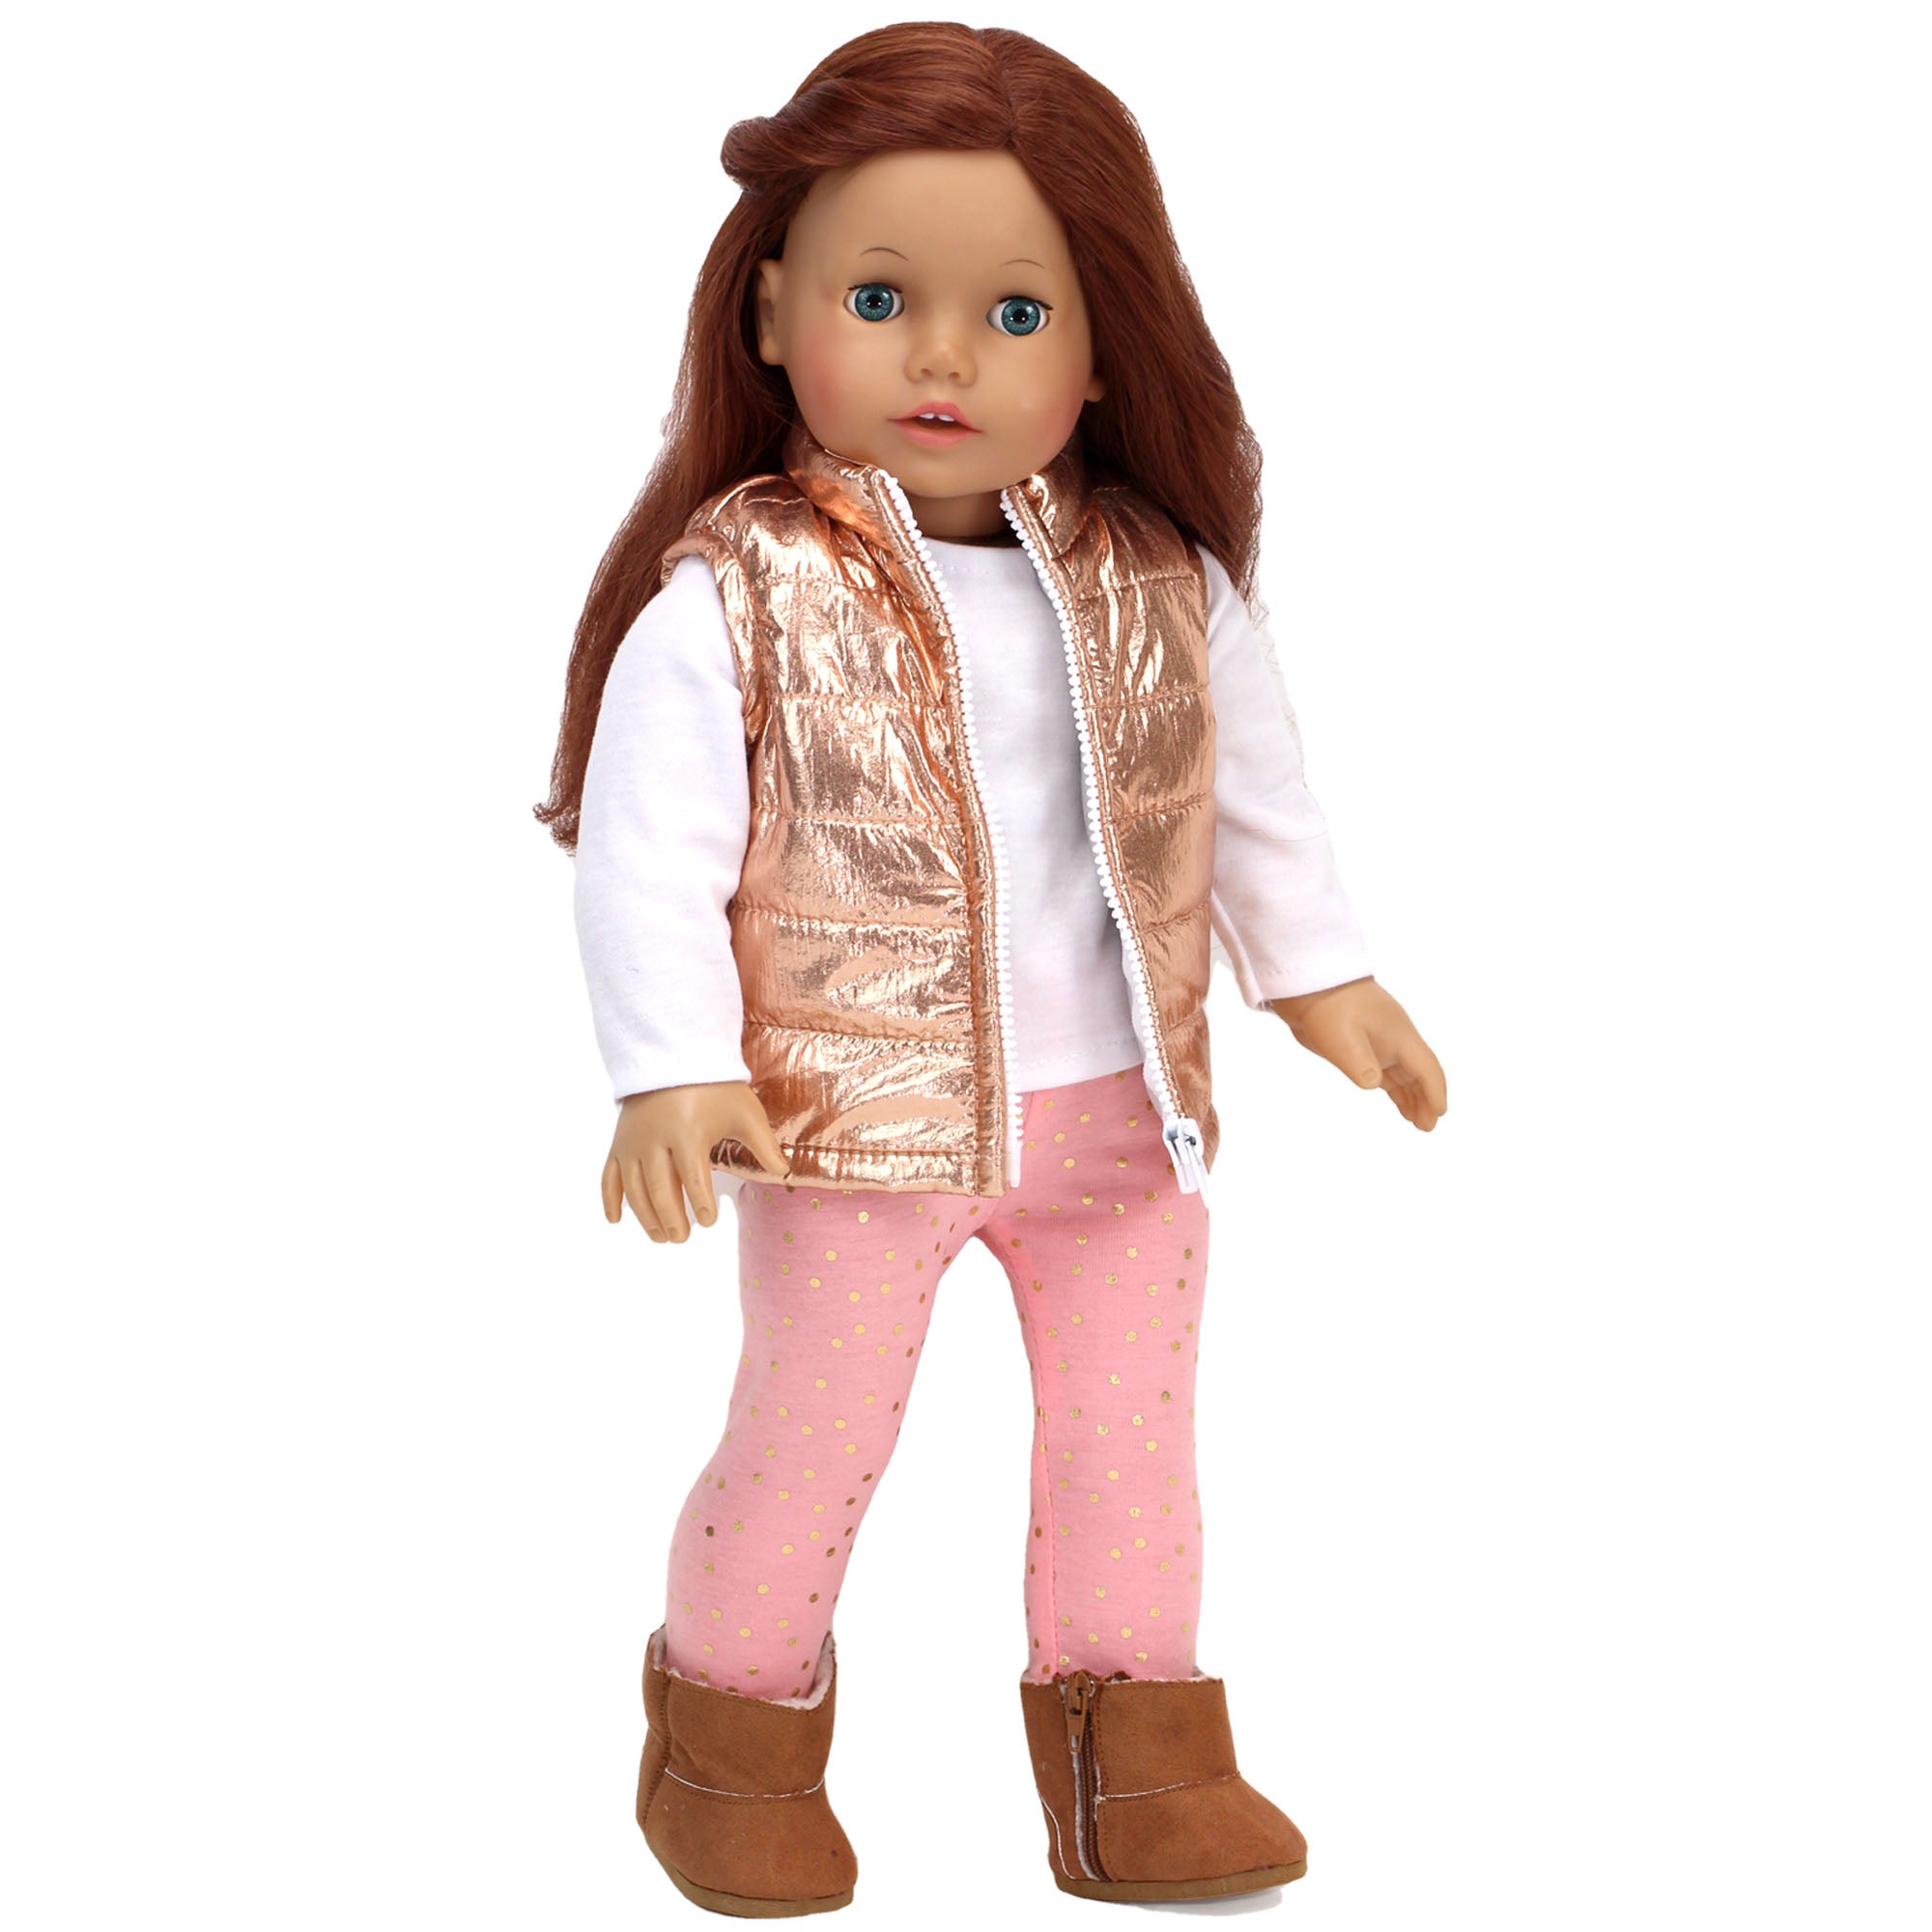 Sophia’s Metallic Zip-Up Vest, Peach Leggings with Gold Polka Dots, & White Long-Sleeved T-Shirt Complete Outfit Set for 18” Dolls, Gold